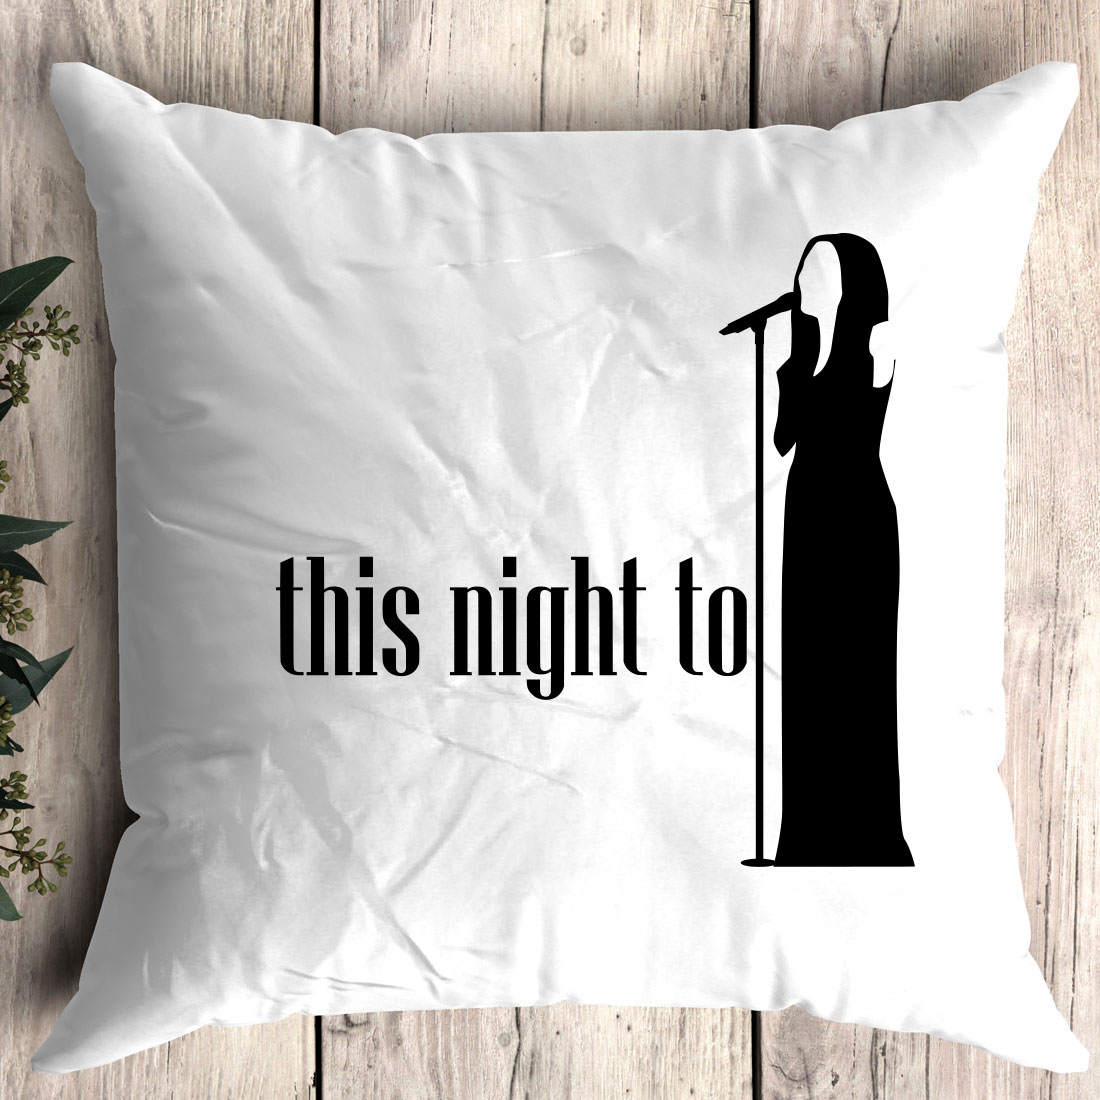 White pillow with a black silhouette of a woman singing into a microphone.